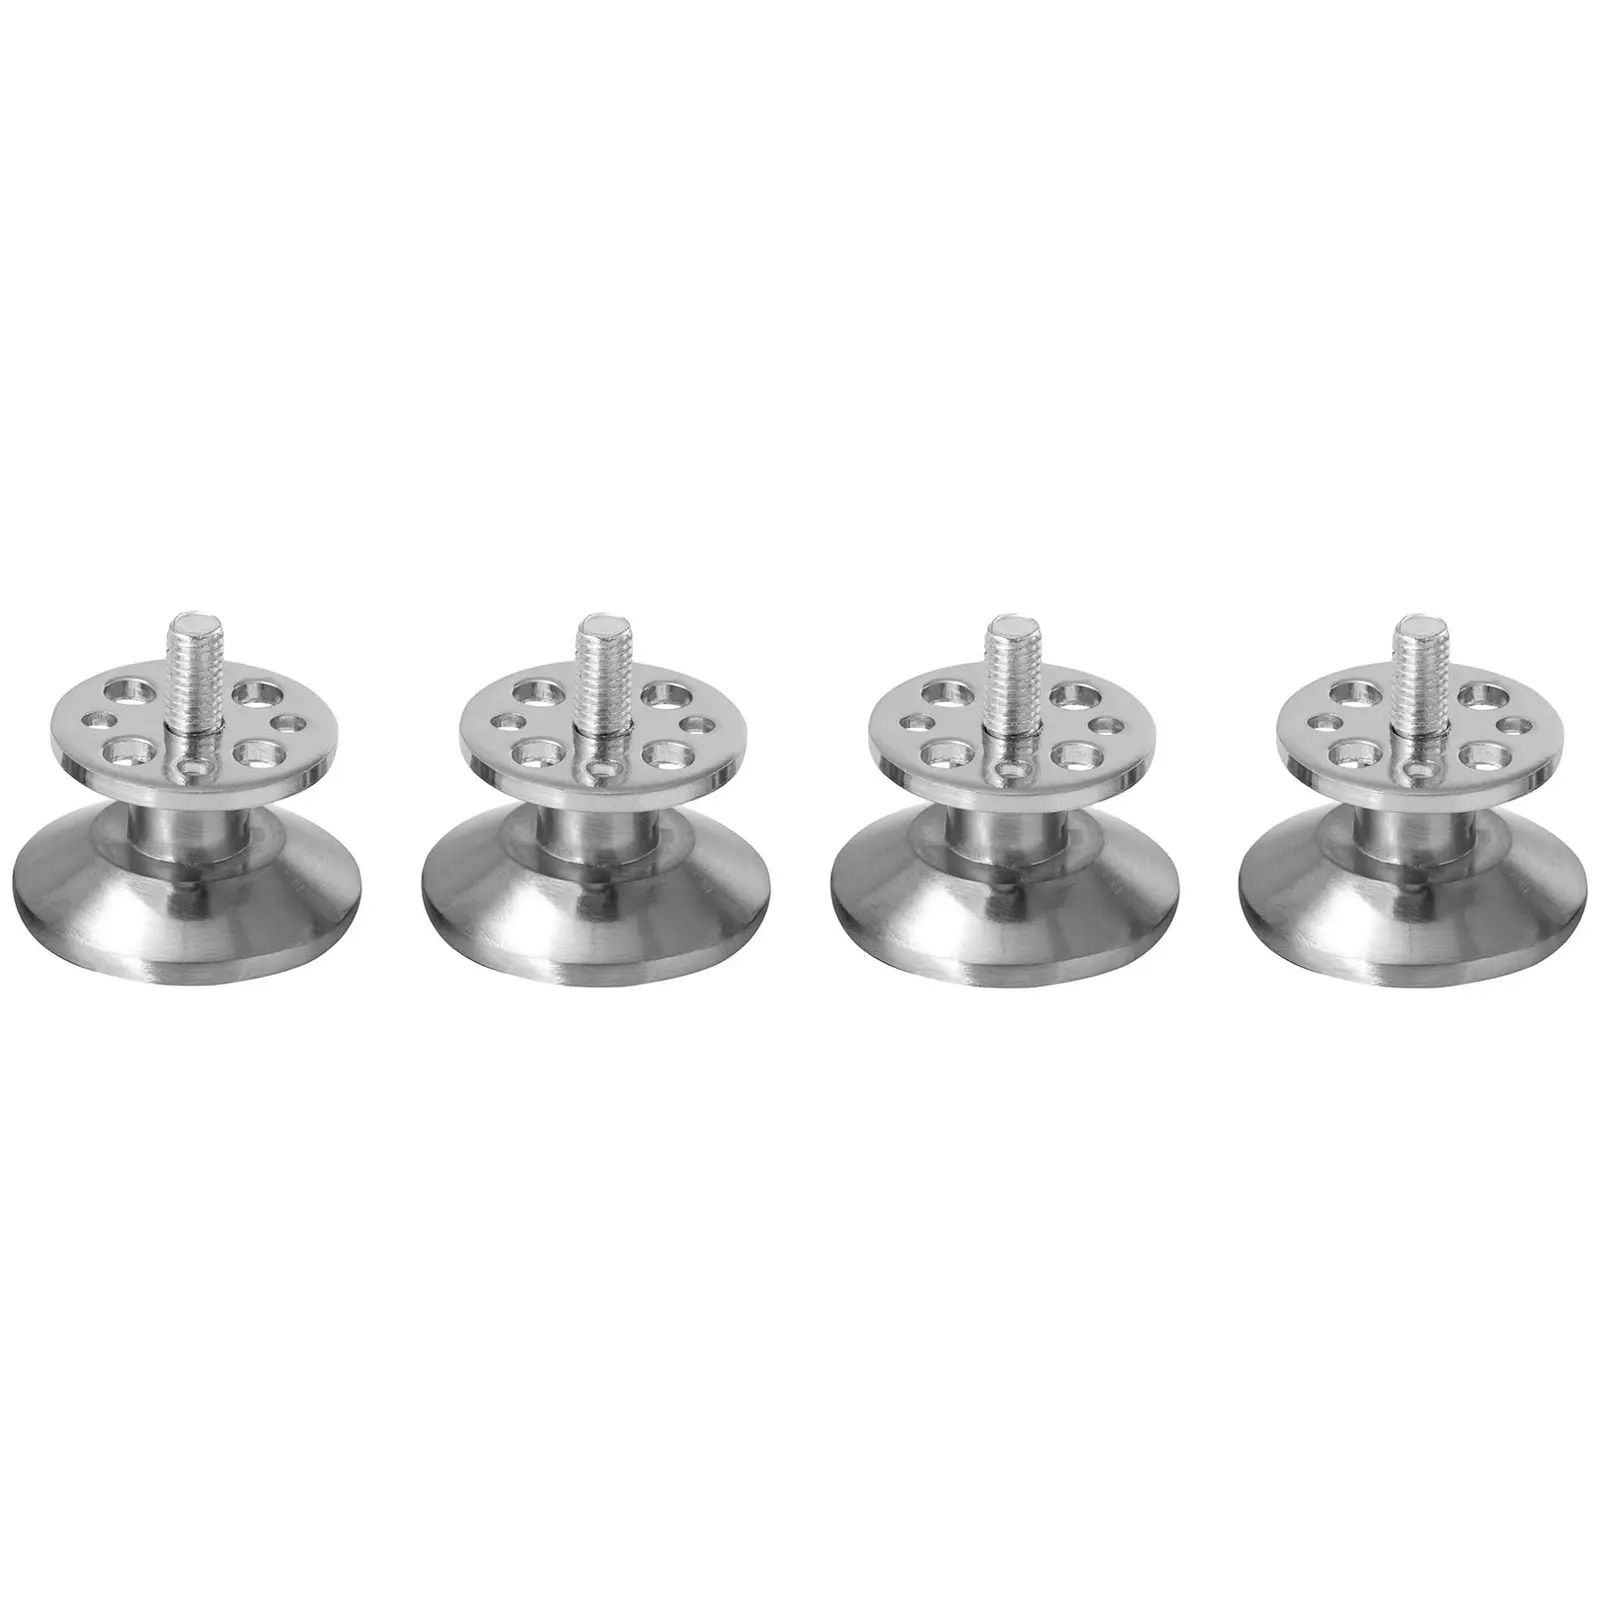 Plate Warmer for 37 pieces - Royal Catering